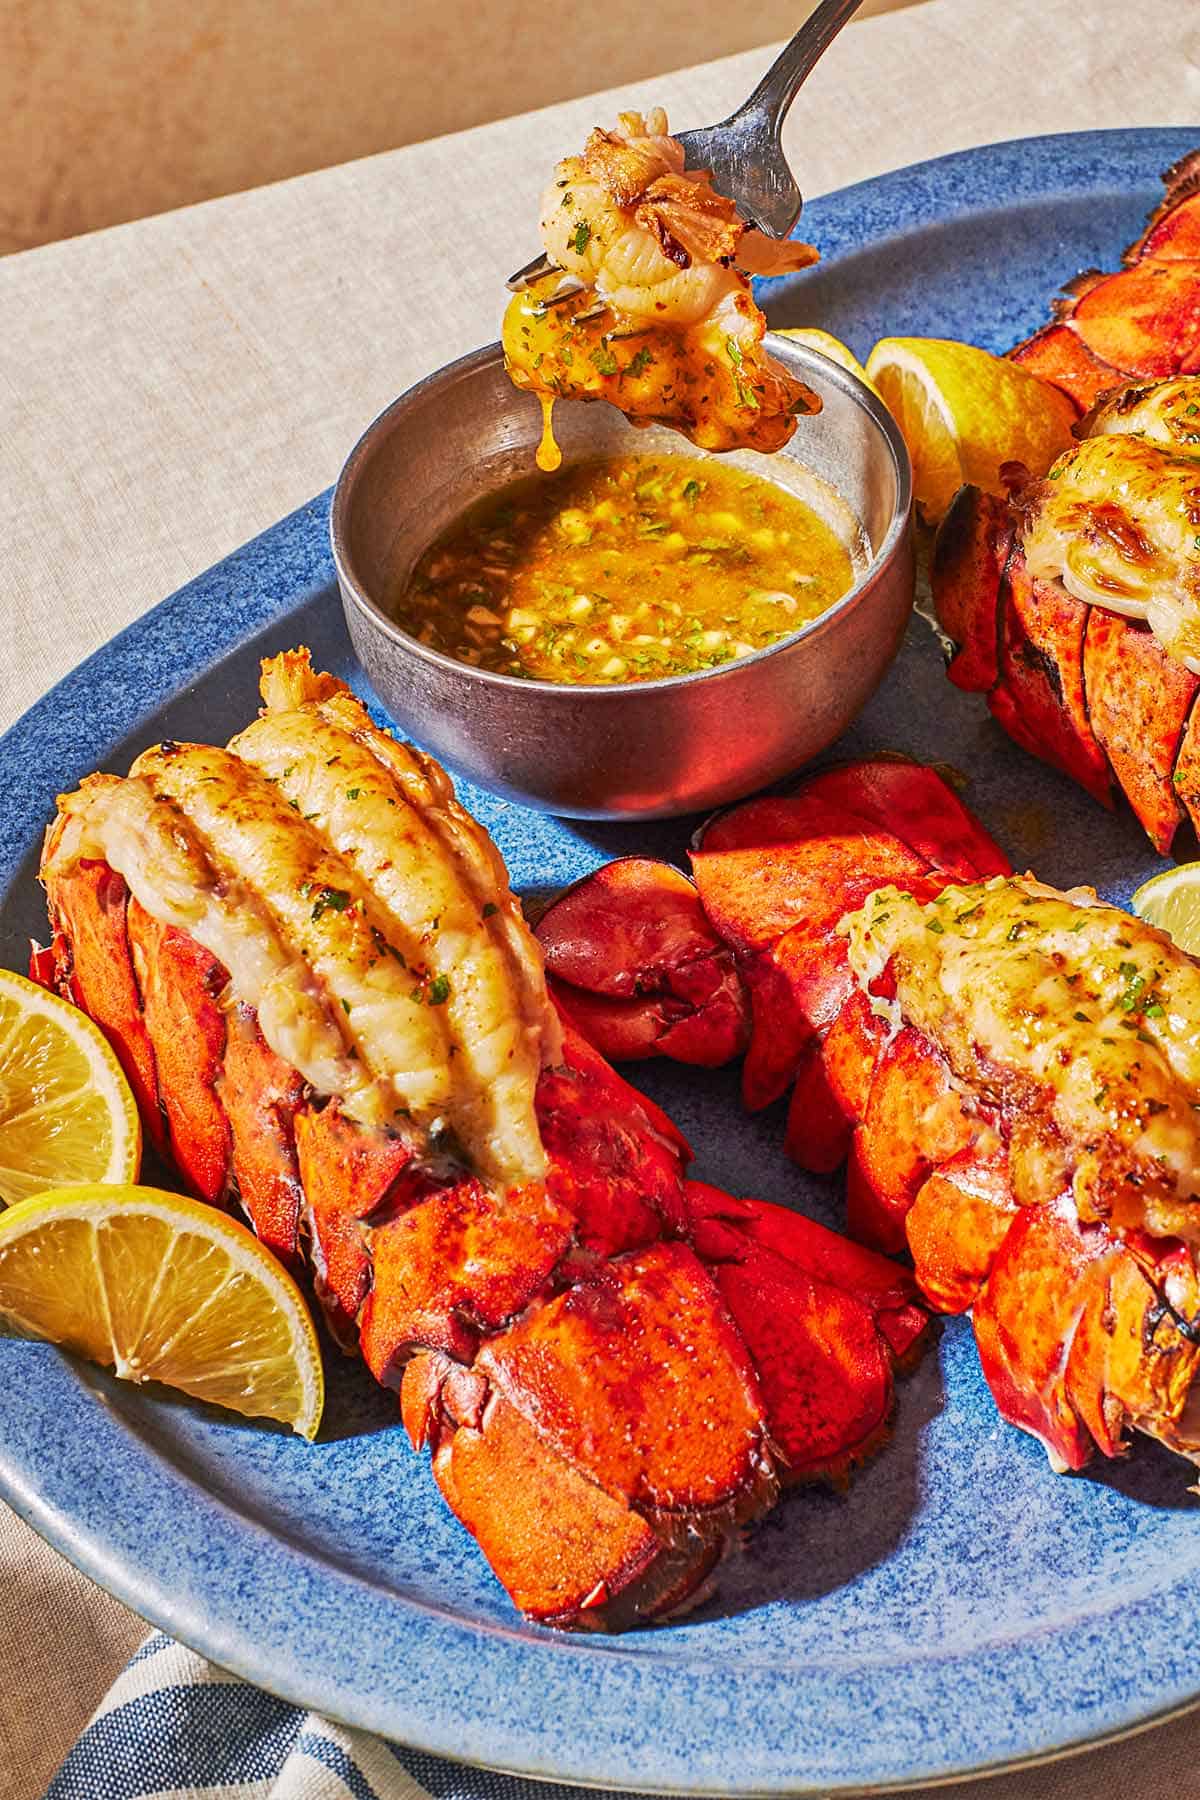 Three broiled lobster tails on a platter with lemon wedges and a bowl of butter sauce. A bite of lobster is being lifted from the bowl of butter sauce with a fork.